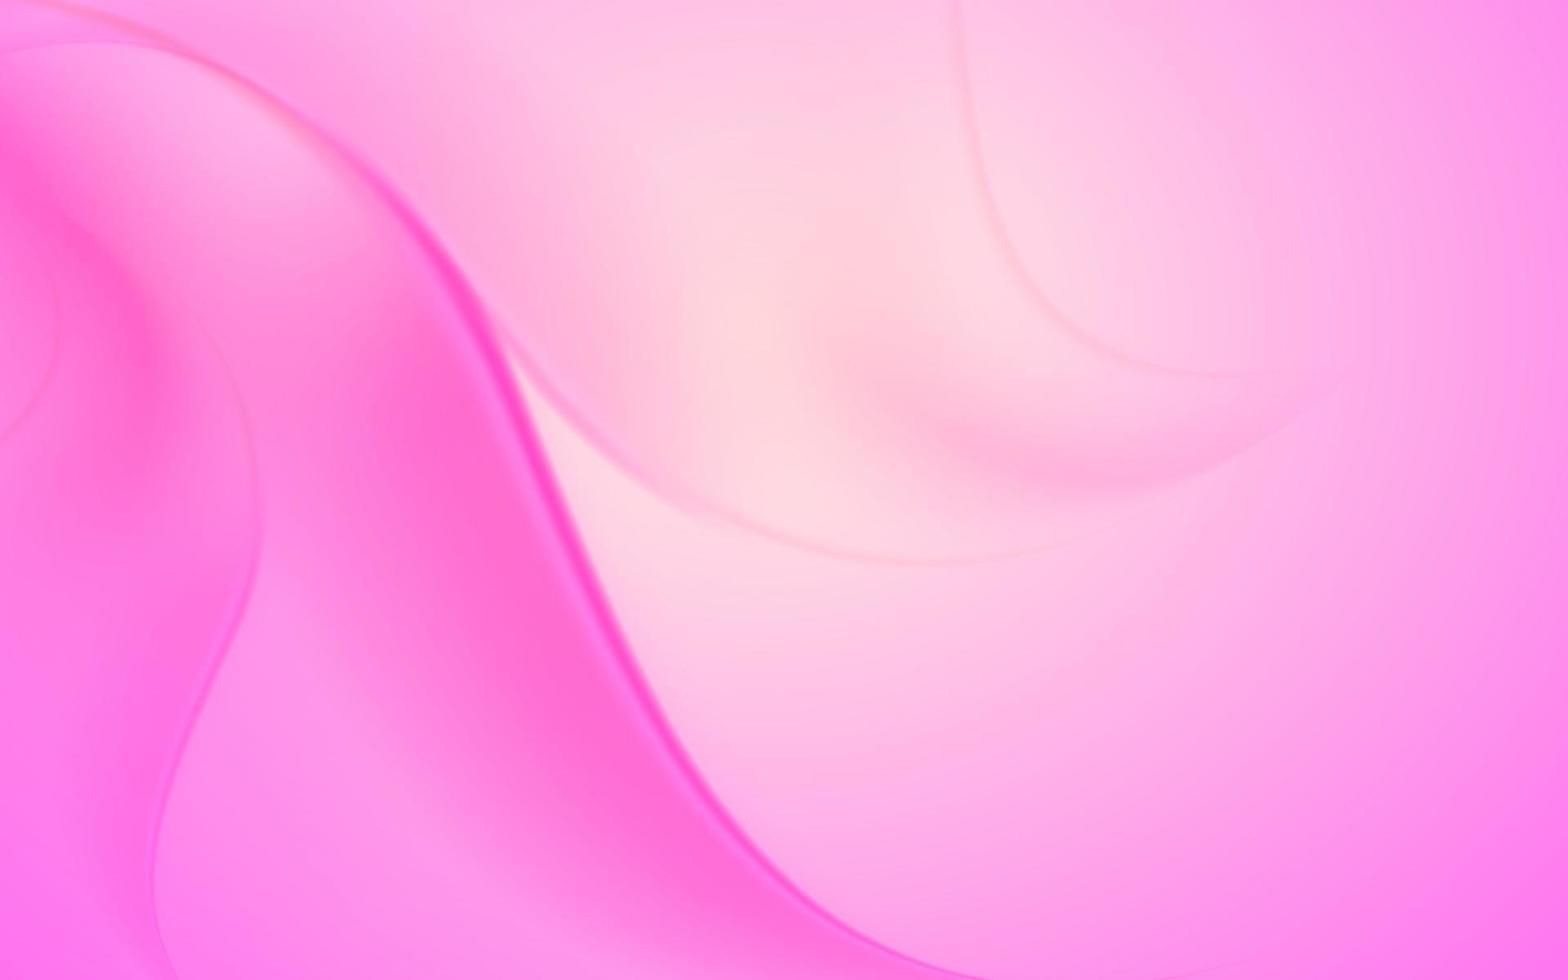 Smooth Wave Background. Vector Illustration. Pink Abstract Vector Background